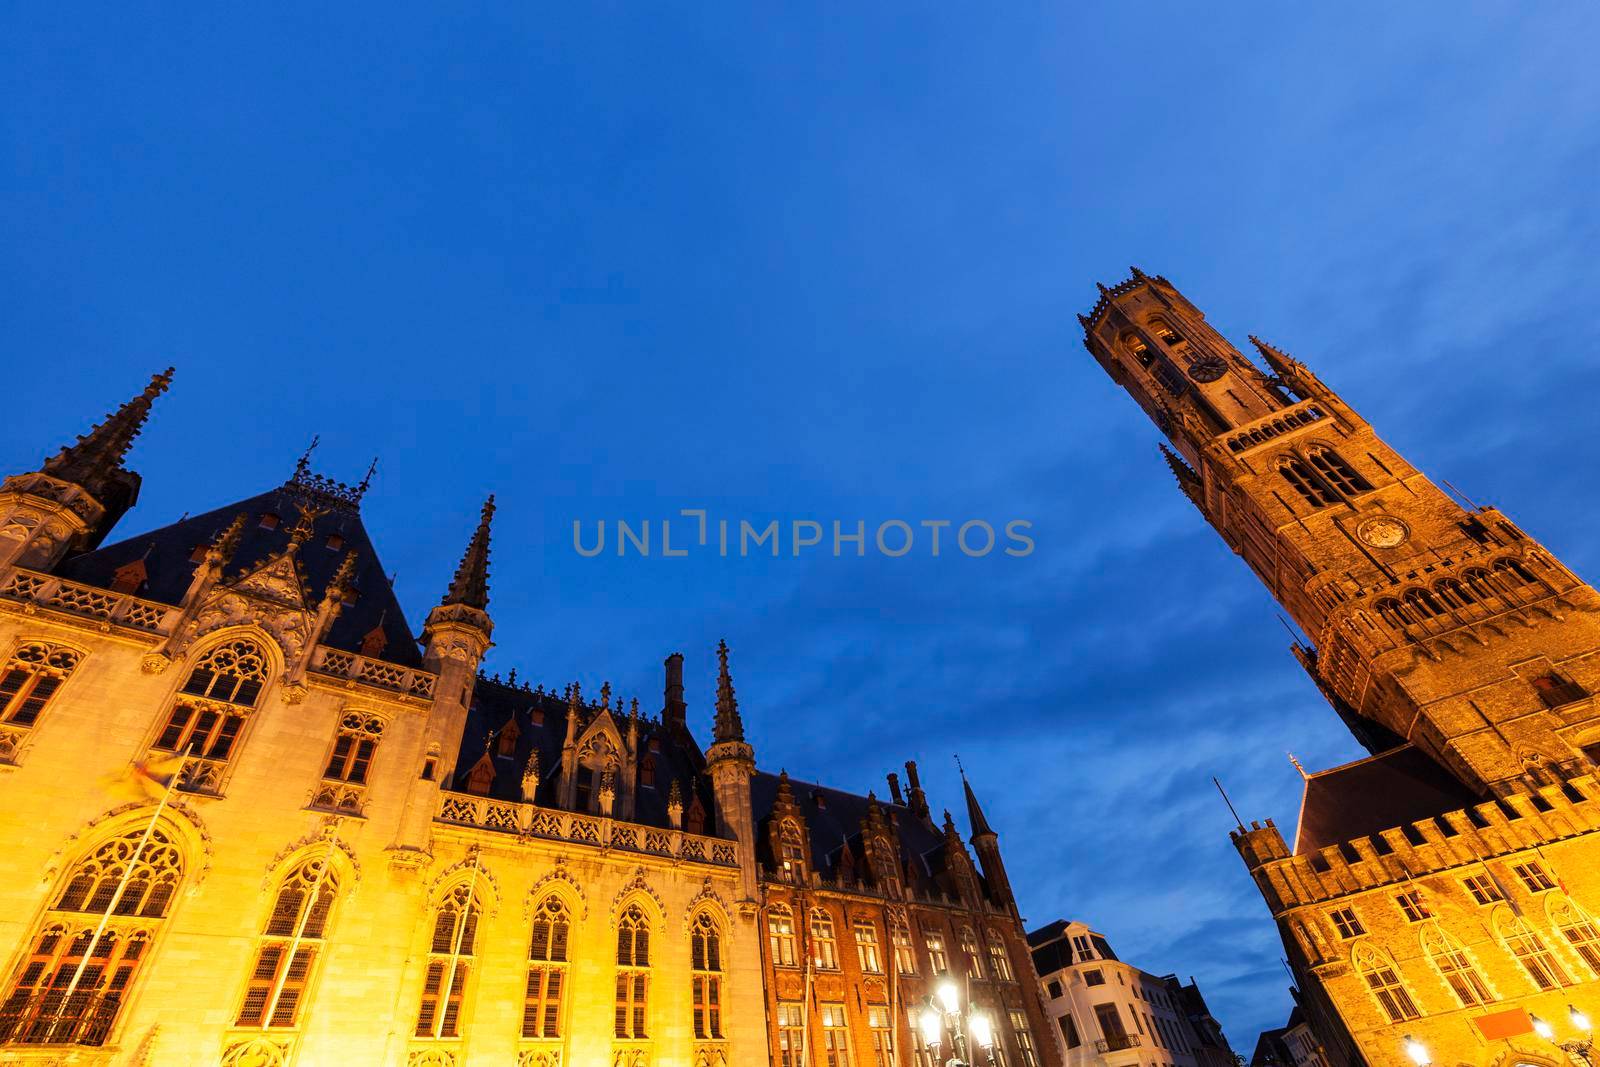 Belfry of Bruges and Provincial Palace by benkrut